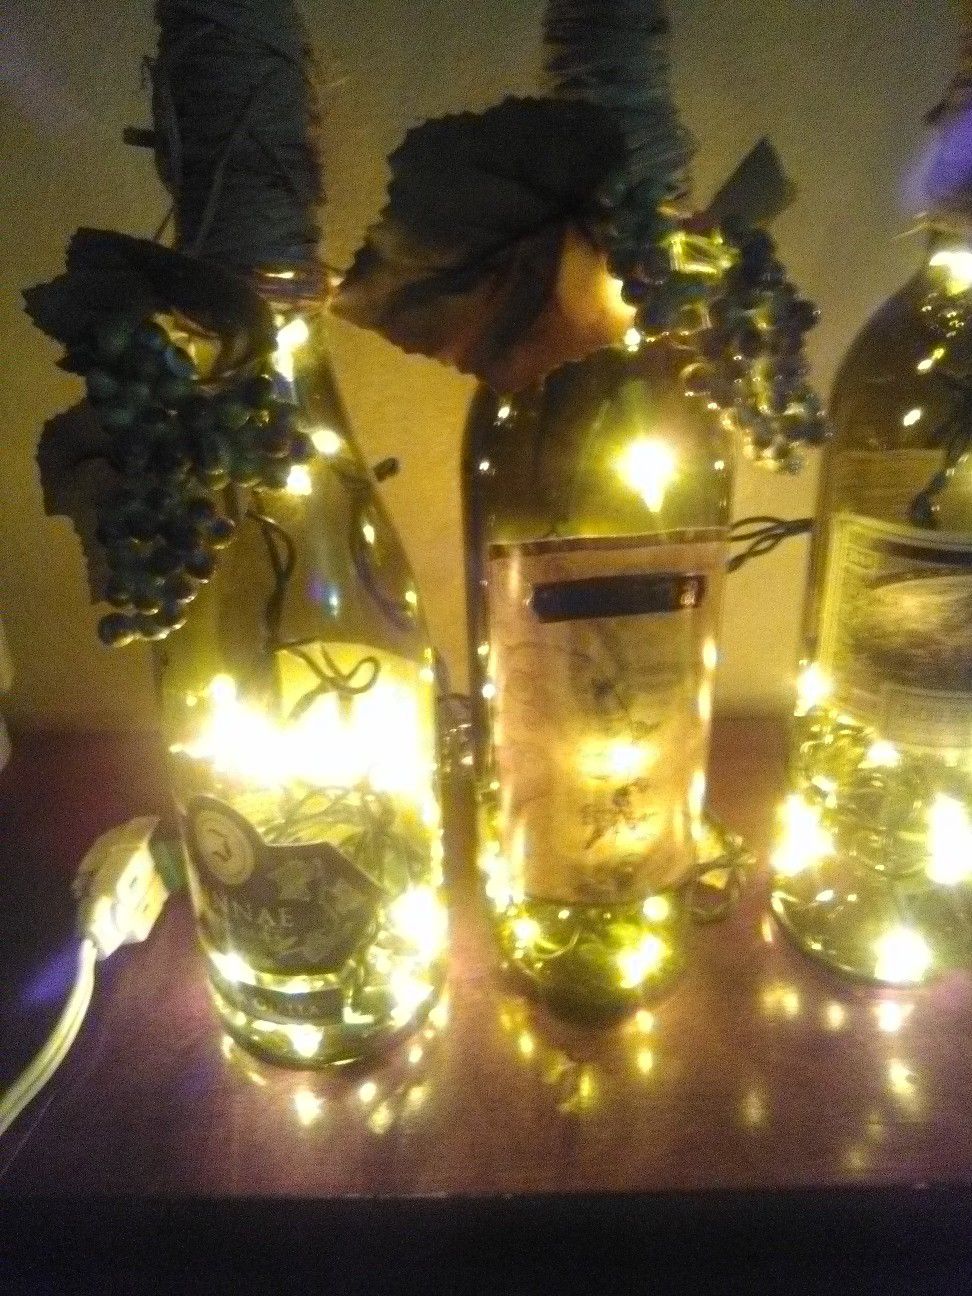 *A set of 4 Wine bottle decorations light up the room